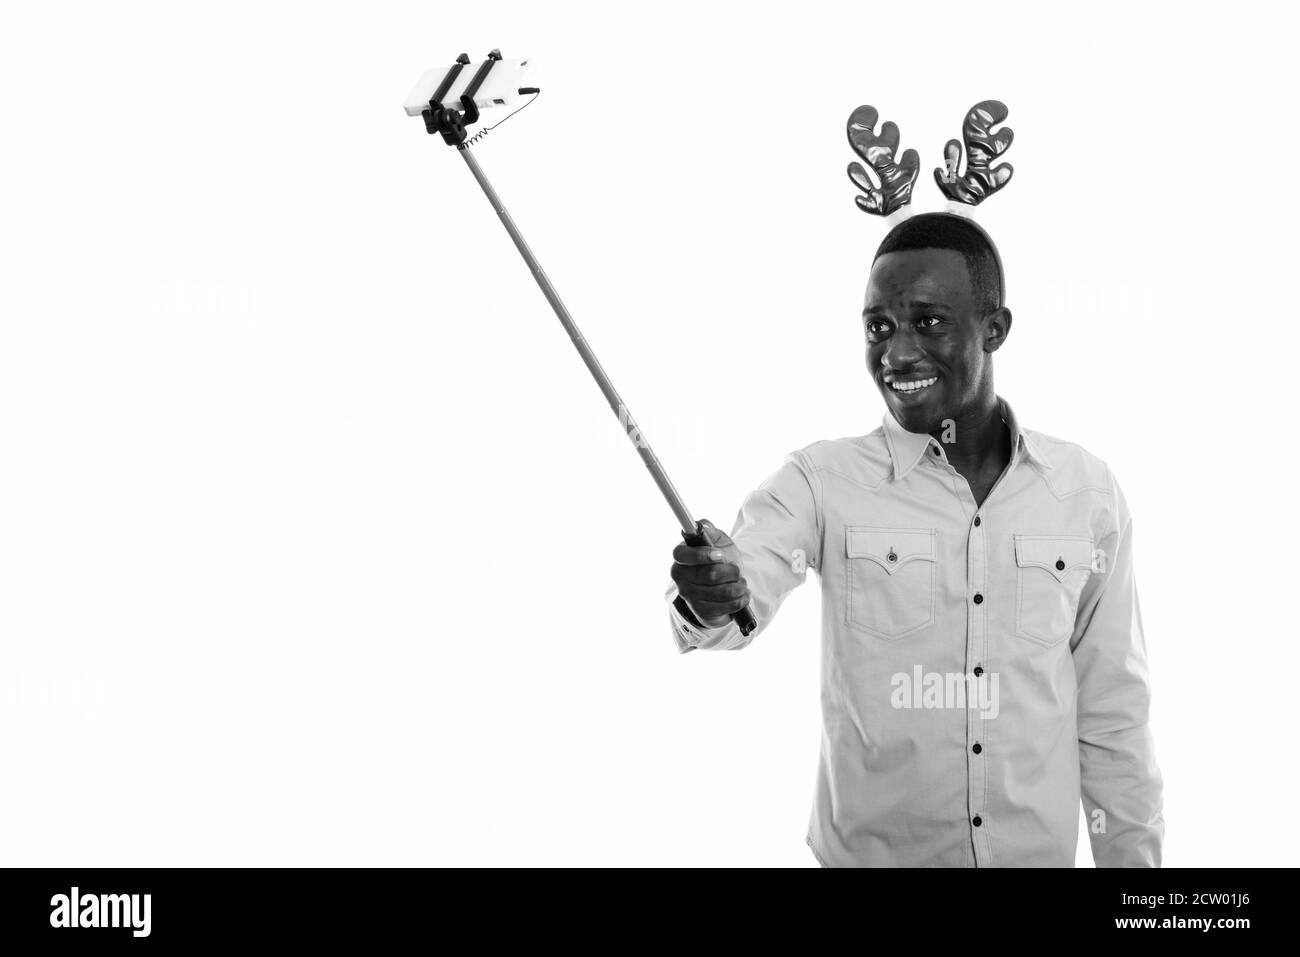 Happy young African man wearing reindeer headband while taking selfie with mobile phone on selfie stick Stock Photo